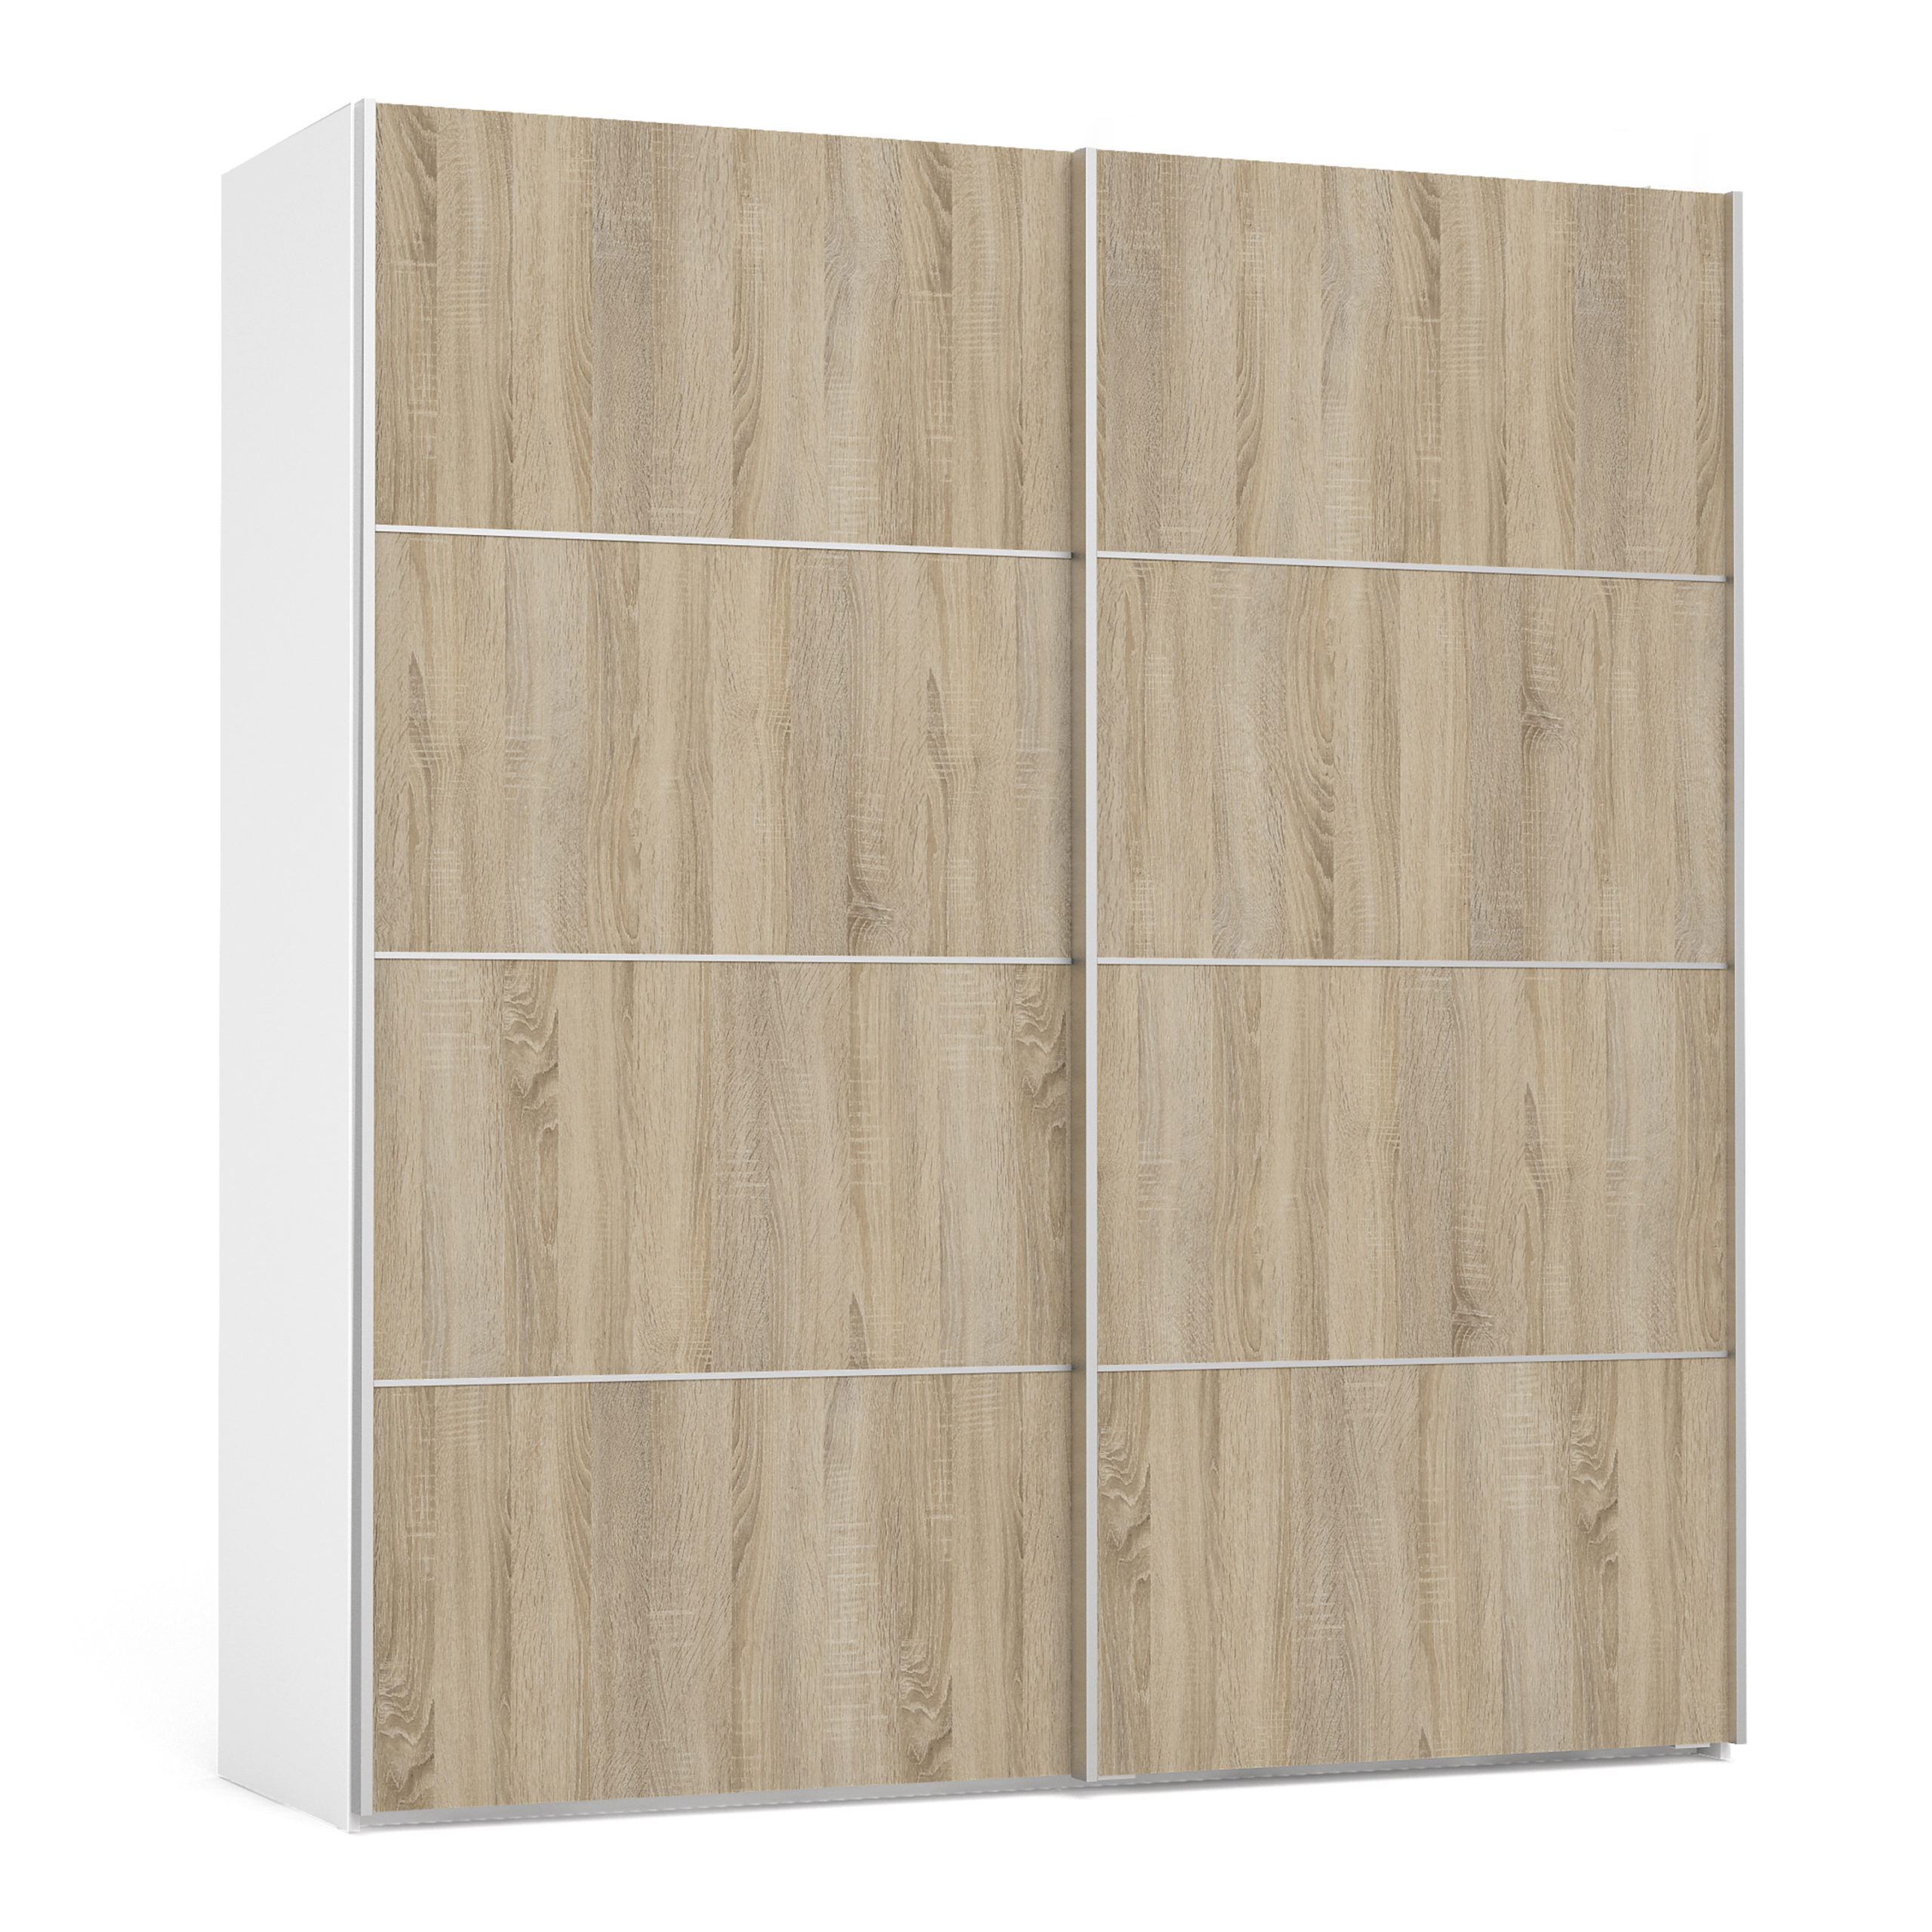 Venice Wardrobe Collection Sliding Wardrobe 180cm in White with Oak Doors with 2 Shelves   Self Assembly